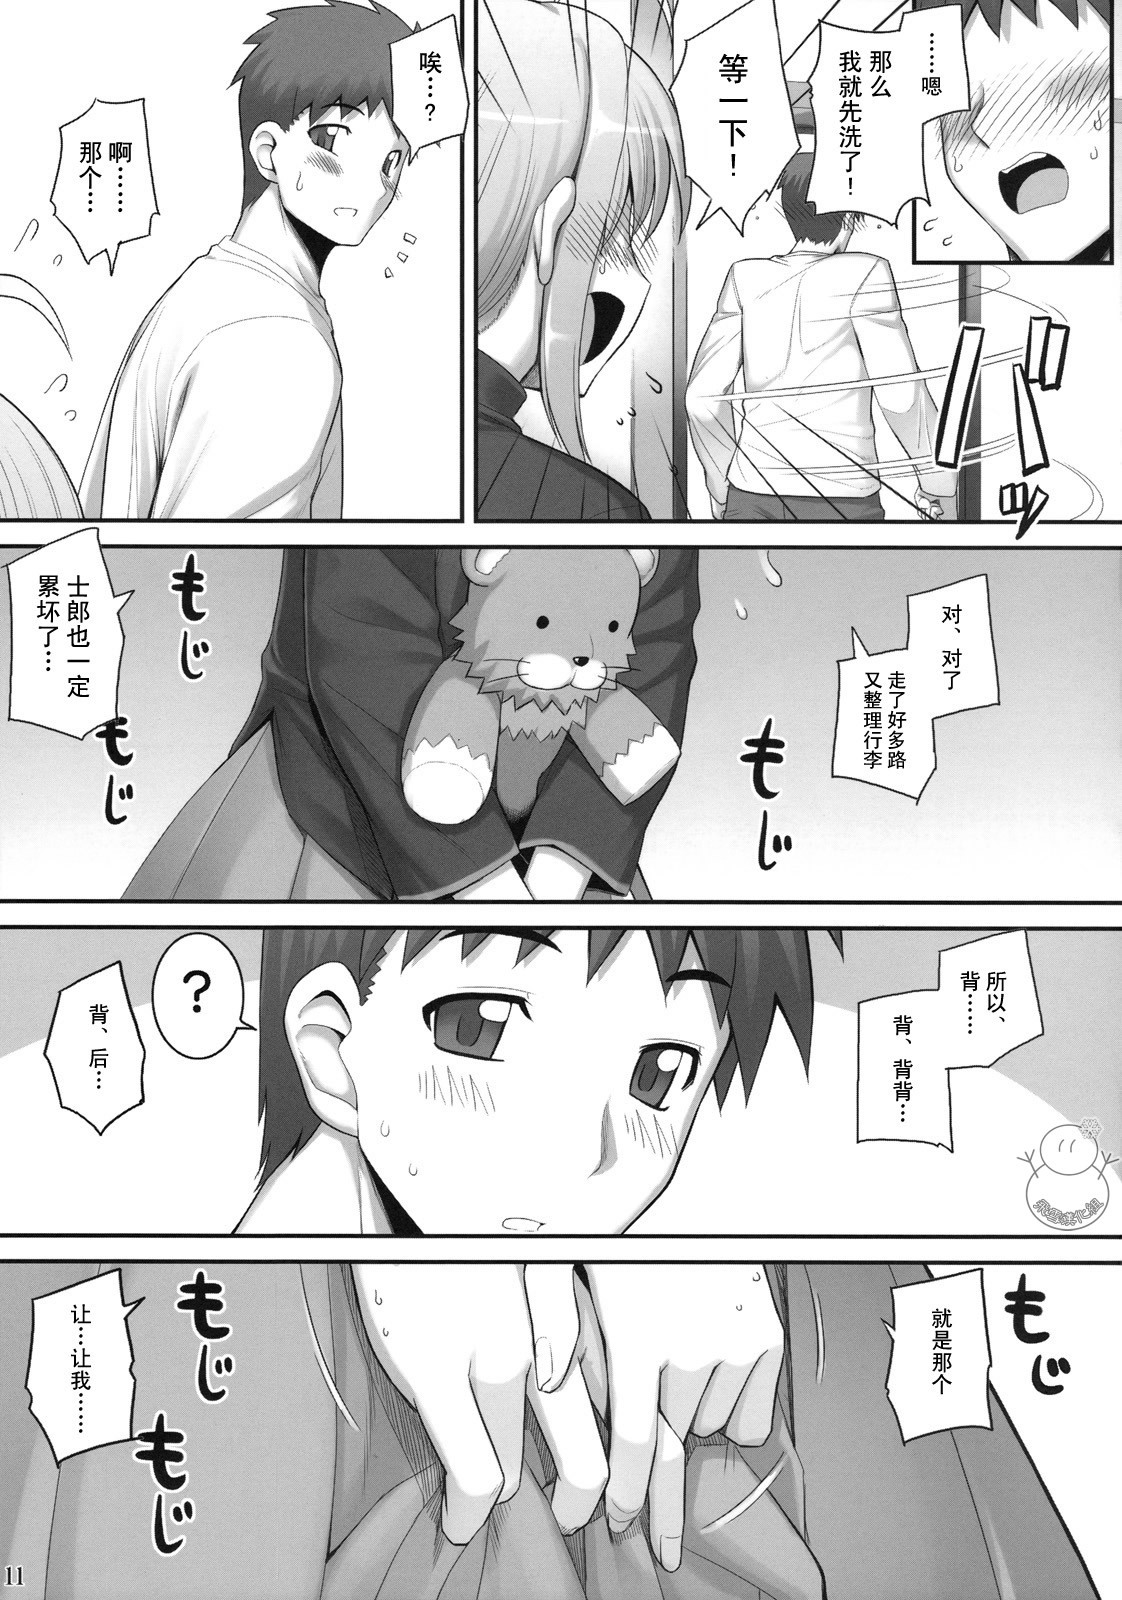 (C75) [RUBBISH Selecting Squad (Namonashi)] RE 10 (Fate/stay night) [Chinese] [飞雪汉化组] page 10 full